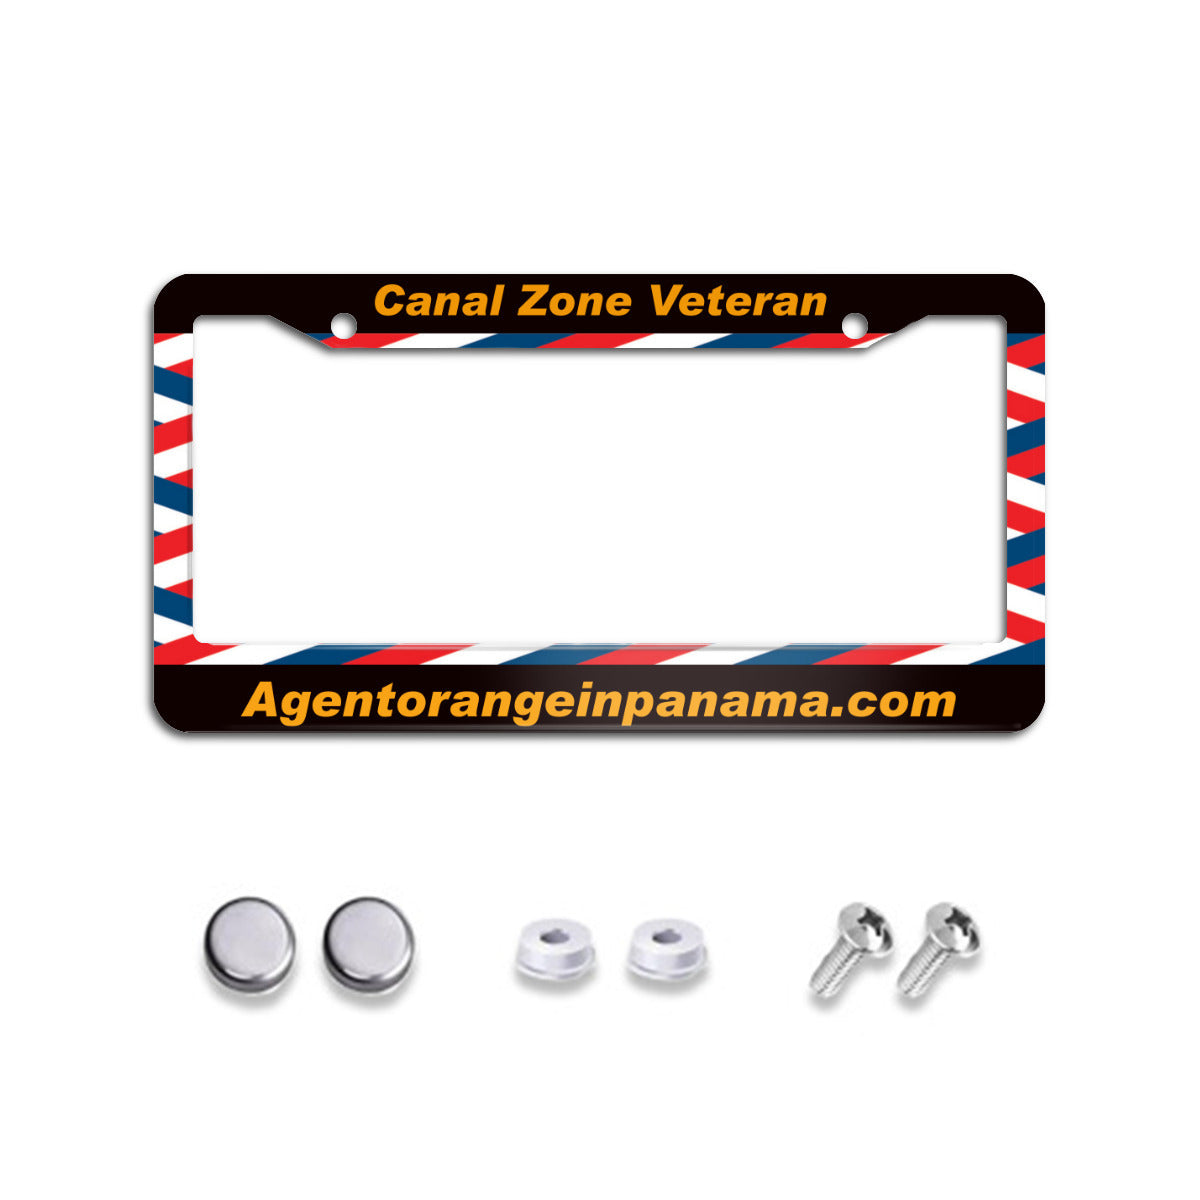 Panama Canal Zone License Plate Cover - SHIPPING INCLUDED